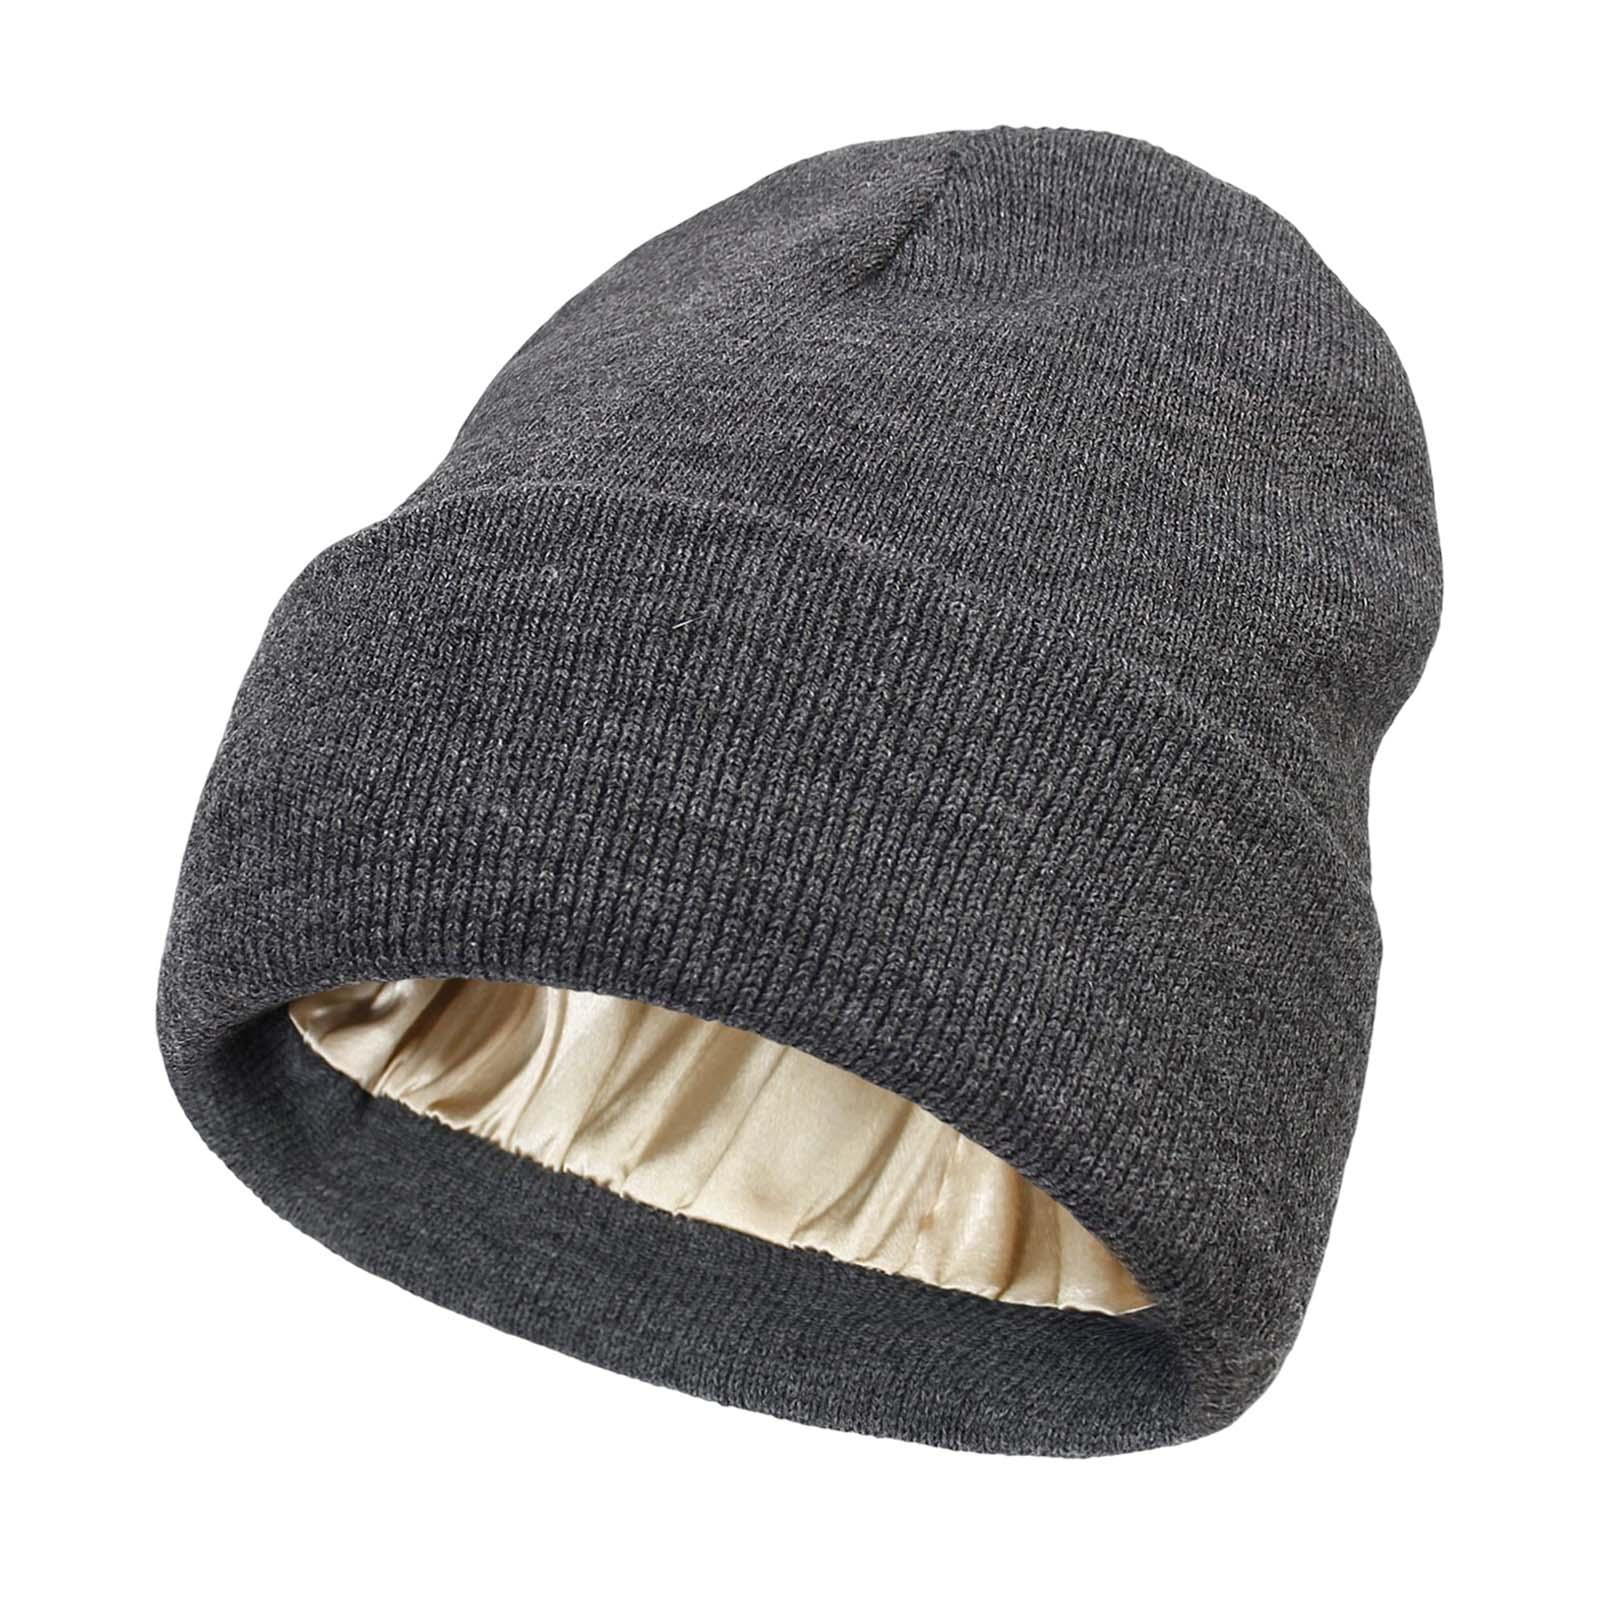 Sharplace unisex Winter Beanie Fashion Versatile Soft Lightweight Casual Autumn Warm Hat for Fishing Backpacking Climbing Camping Outdoor Activities 